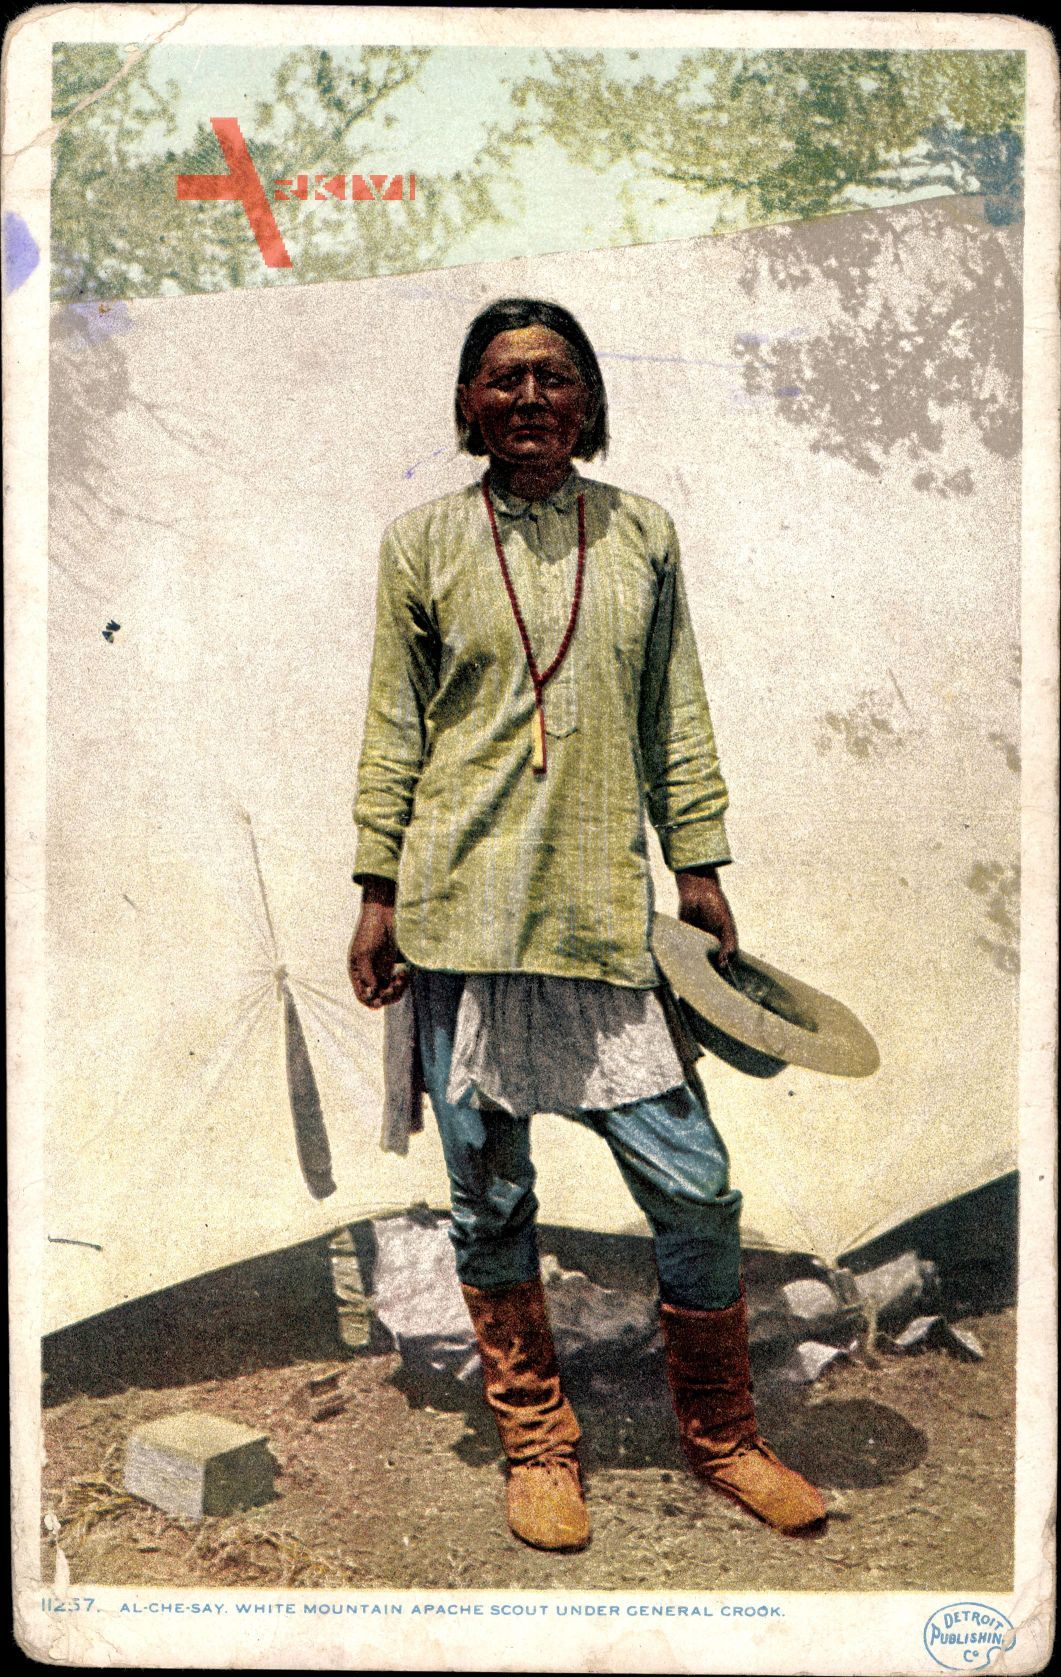 Al Che Say, White Mountain Apache Scout under General Crook, Indianer